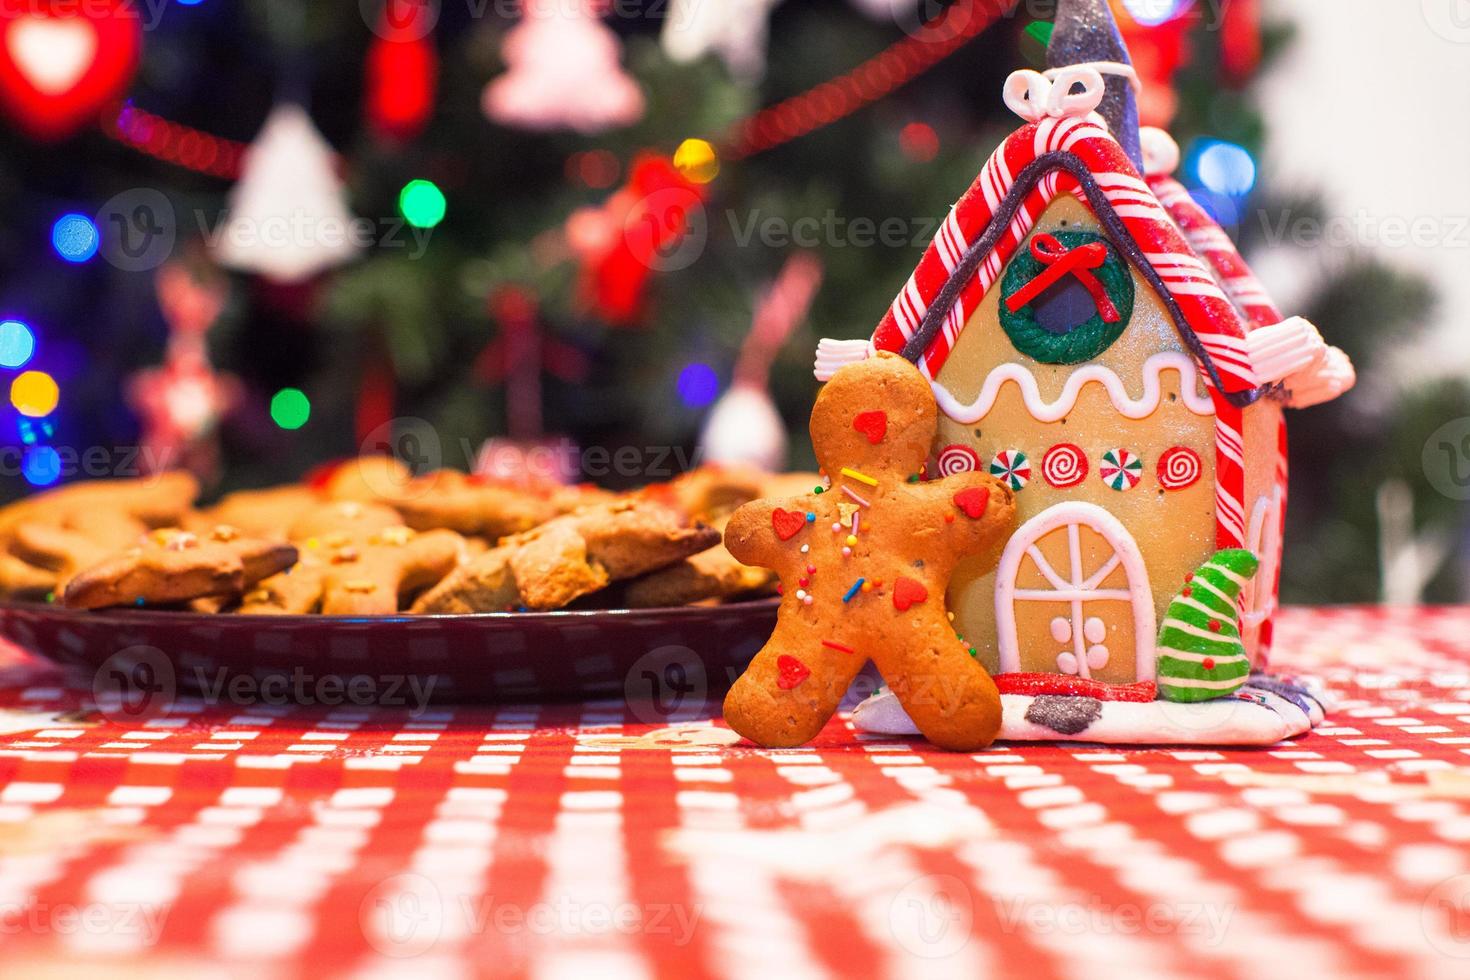 Cute gingerbread man in front of his candy ginger house background the Christmas tree lights photo